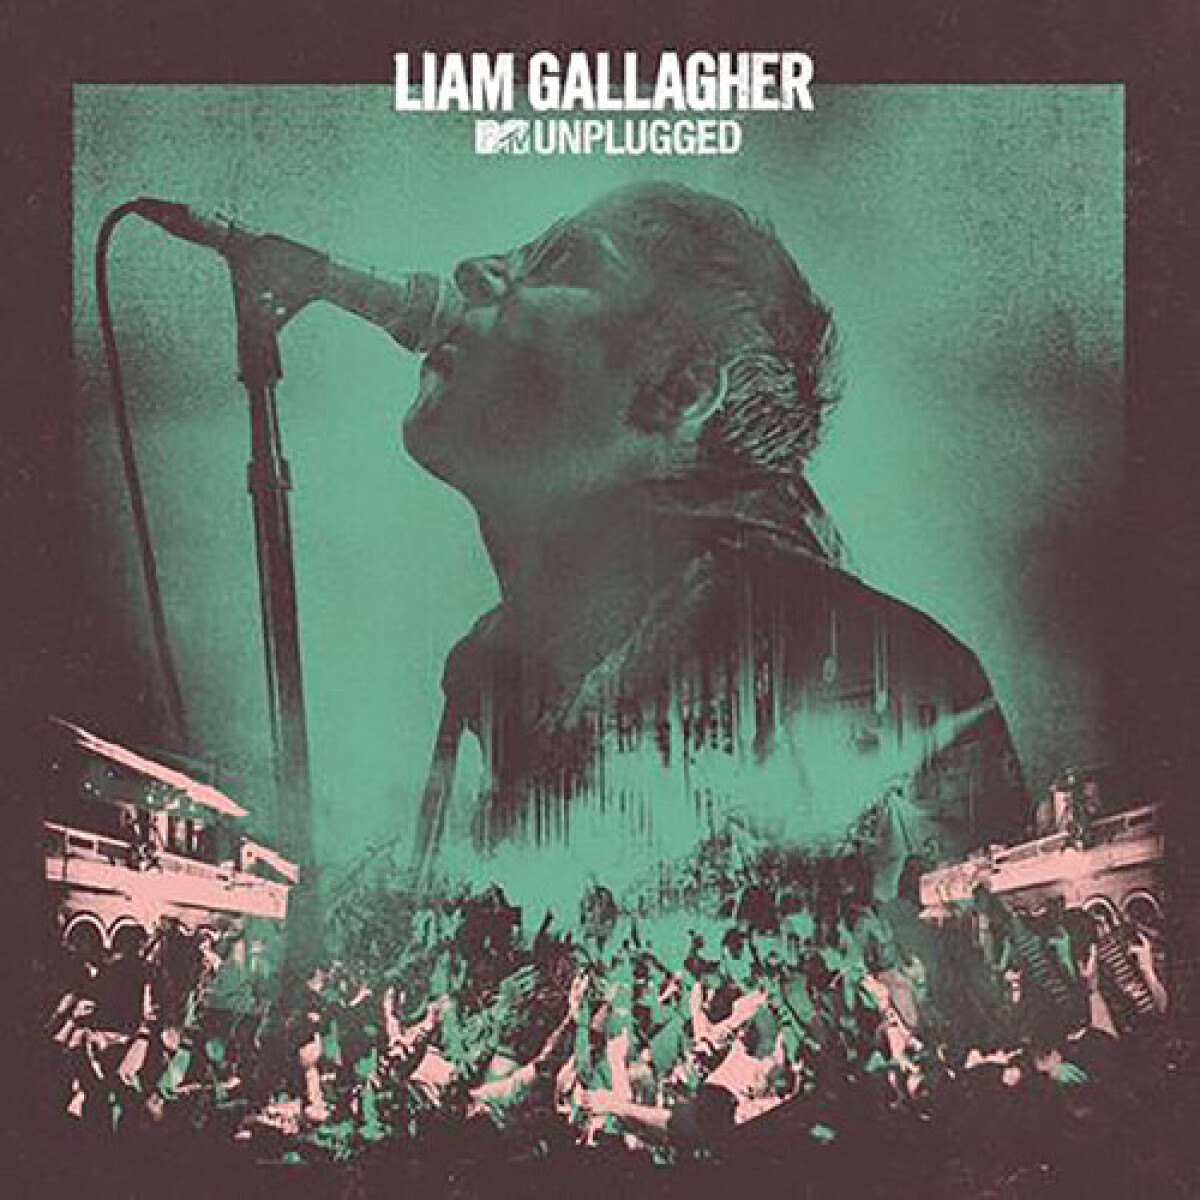 Gallagher Liam - Mtv Unplugged (live At Hull City) 